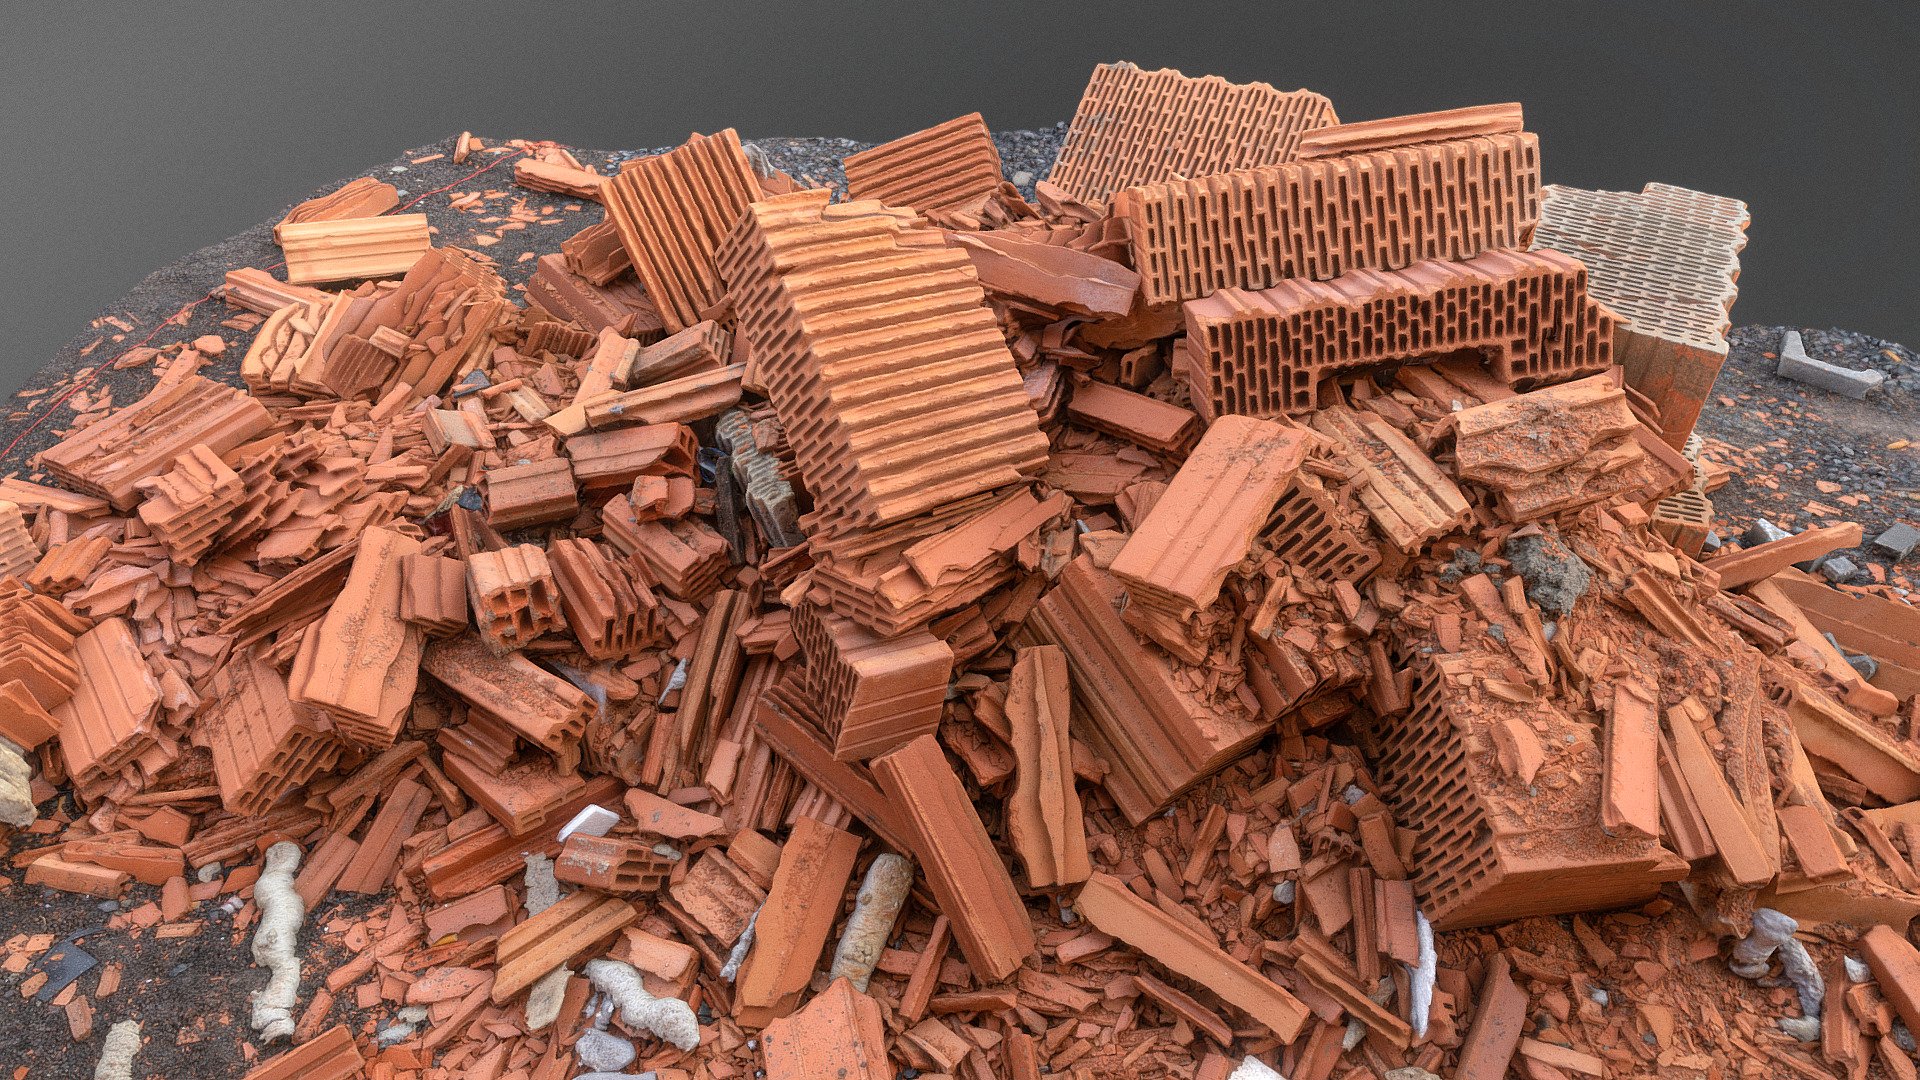 Crushed broken waste modern building perforated bricks on gravel ground construction site

photogrammetry scan (150x36mp), 2x16k textures + hd normals  (as additional .zip download) - Crushed bricks - Buy Royalty Free 3D model by matousekfoto 3d model